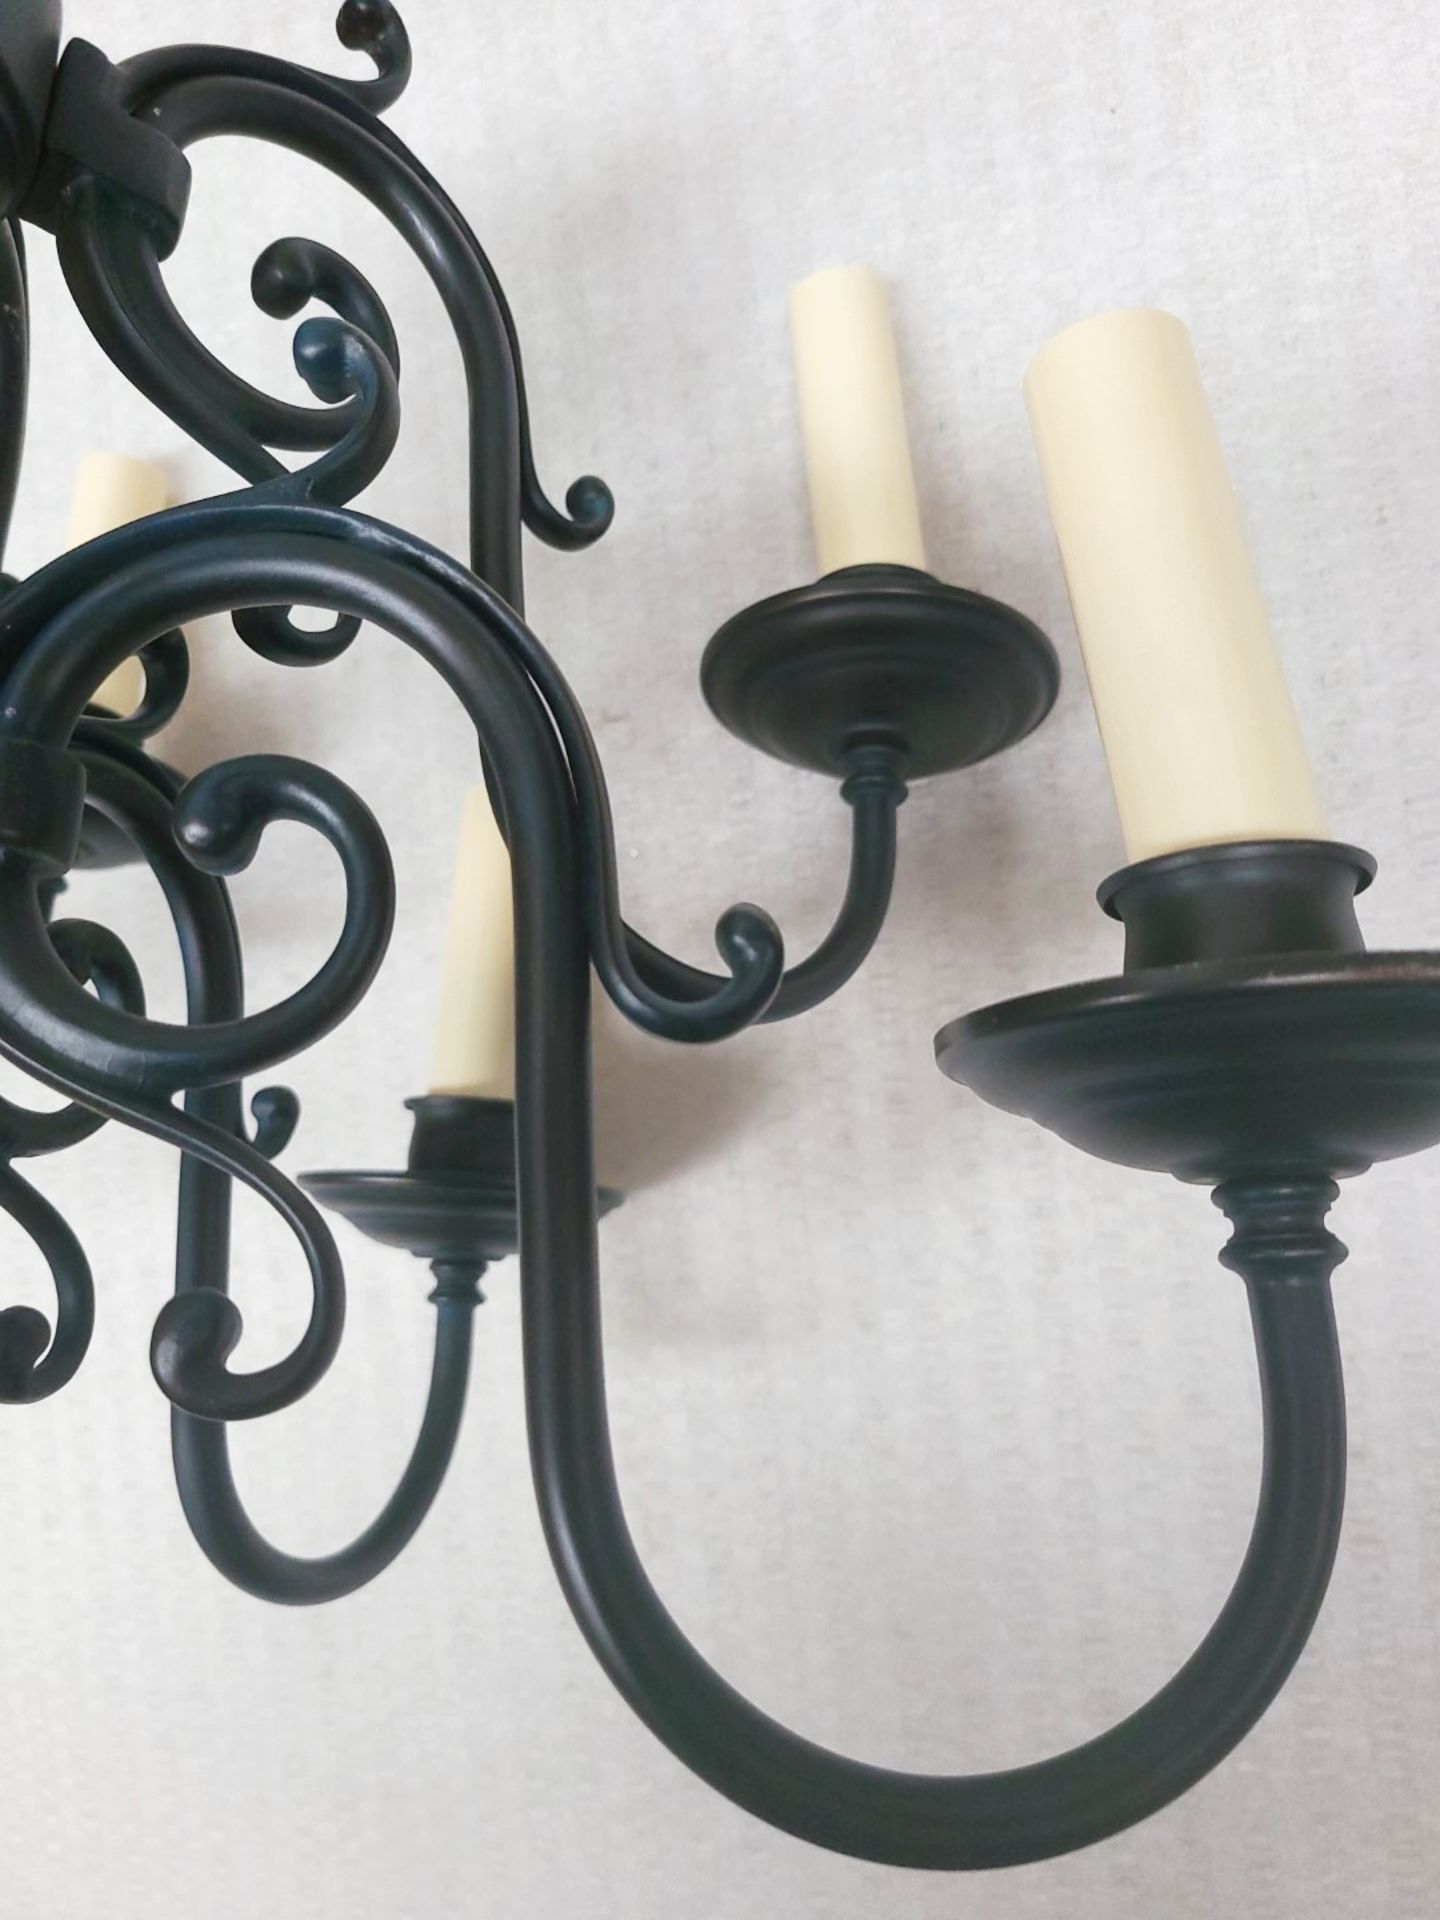 1 x CHELSOM Flemish Style 5 Light Dark Bronze Wall Sconce, With Outswept Curling Arms & Drip Pans - Image 8 of 11